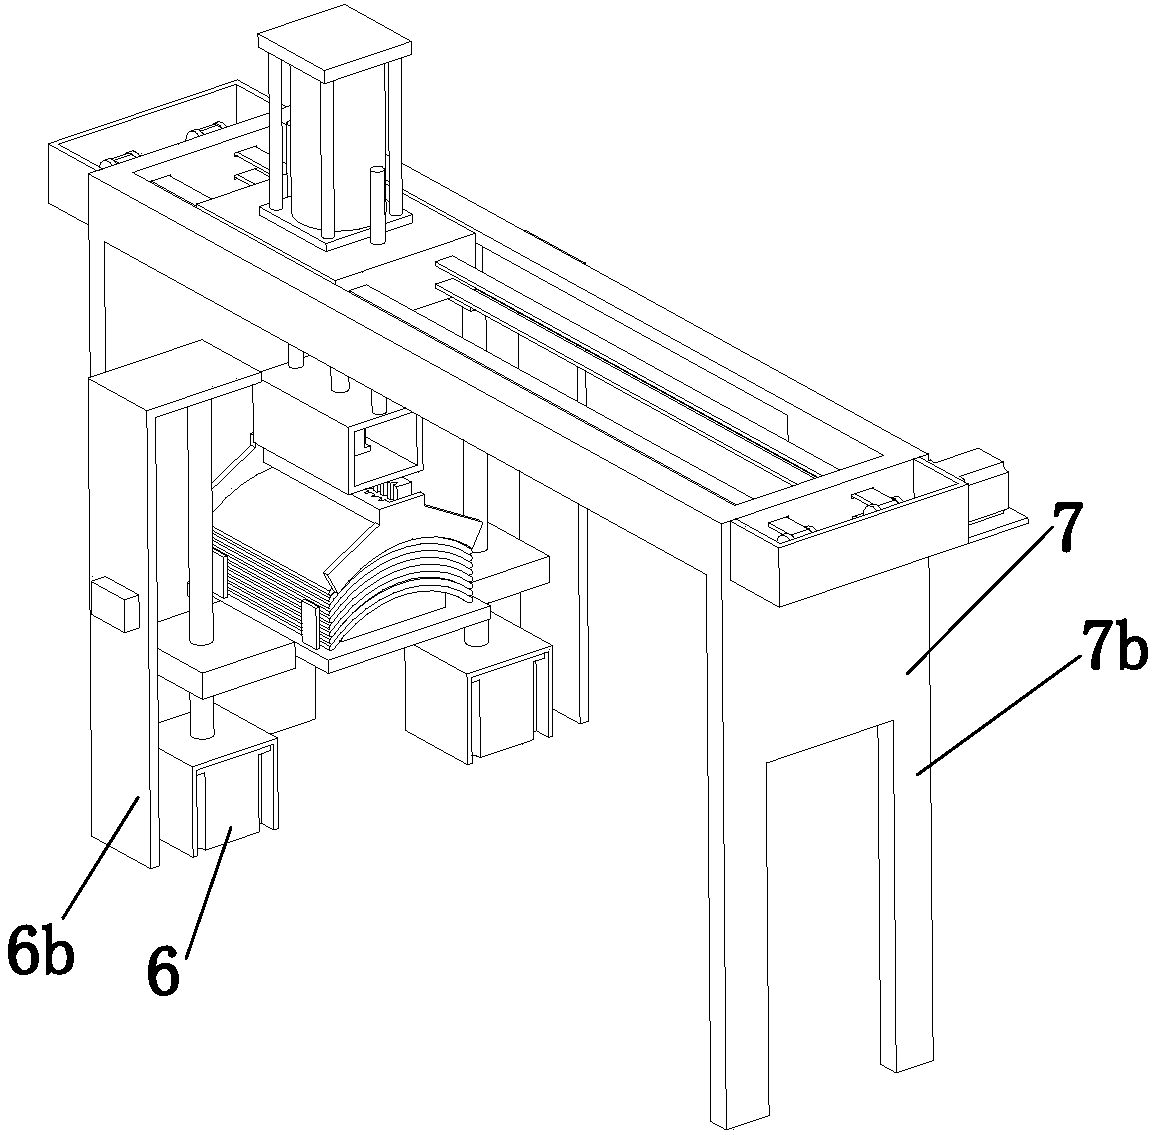 Automatic deburring device for magnetic tile